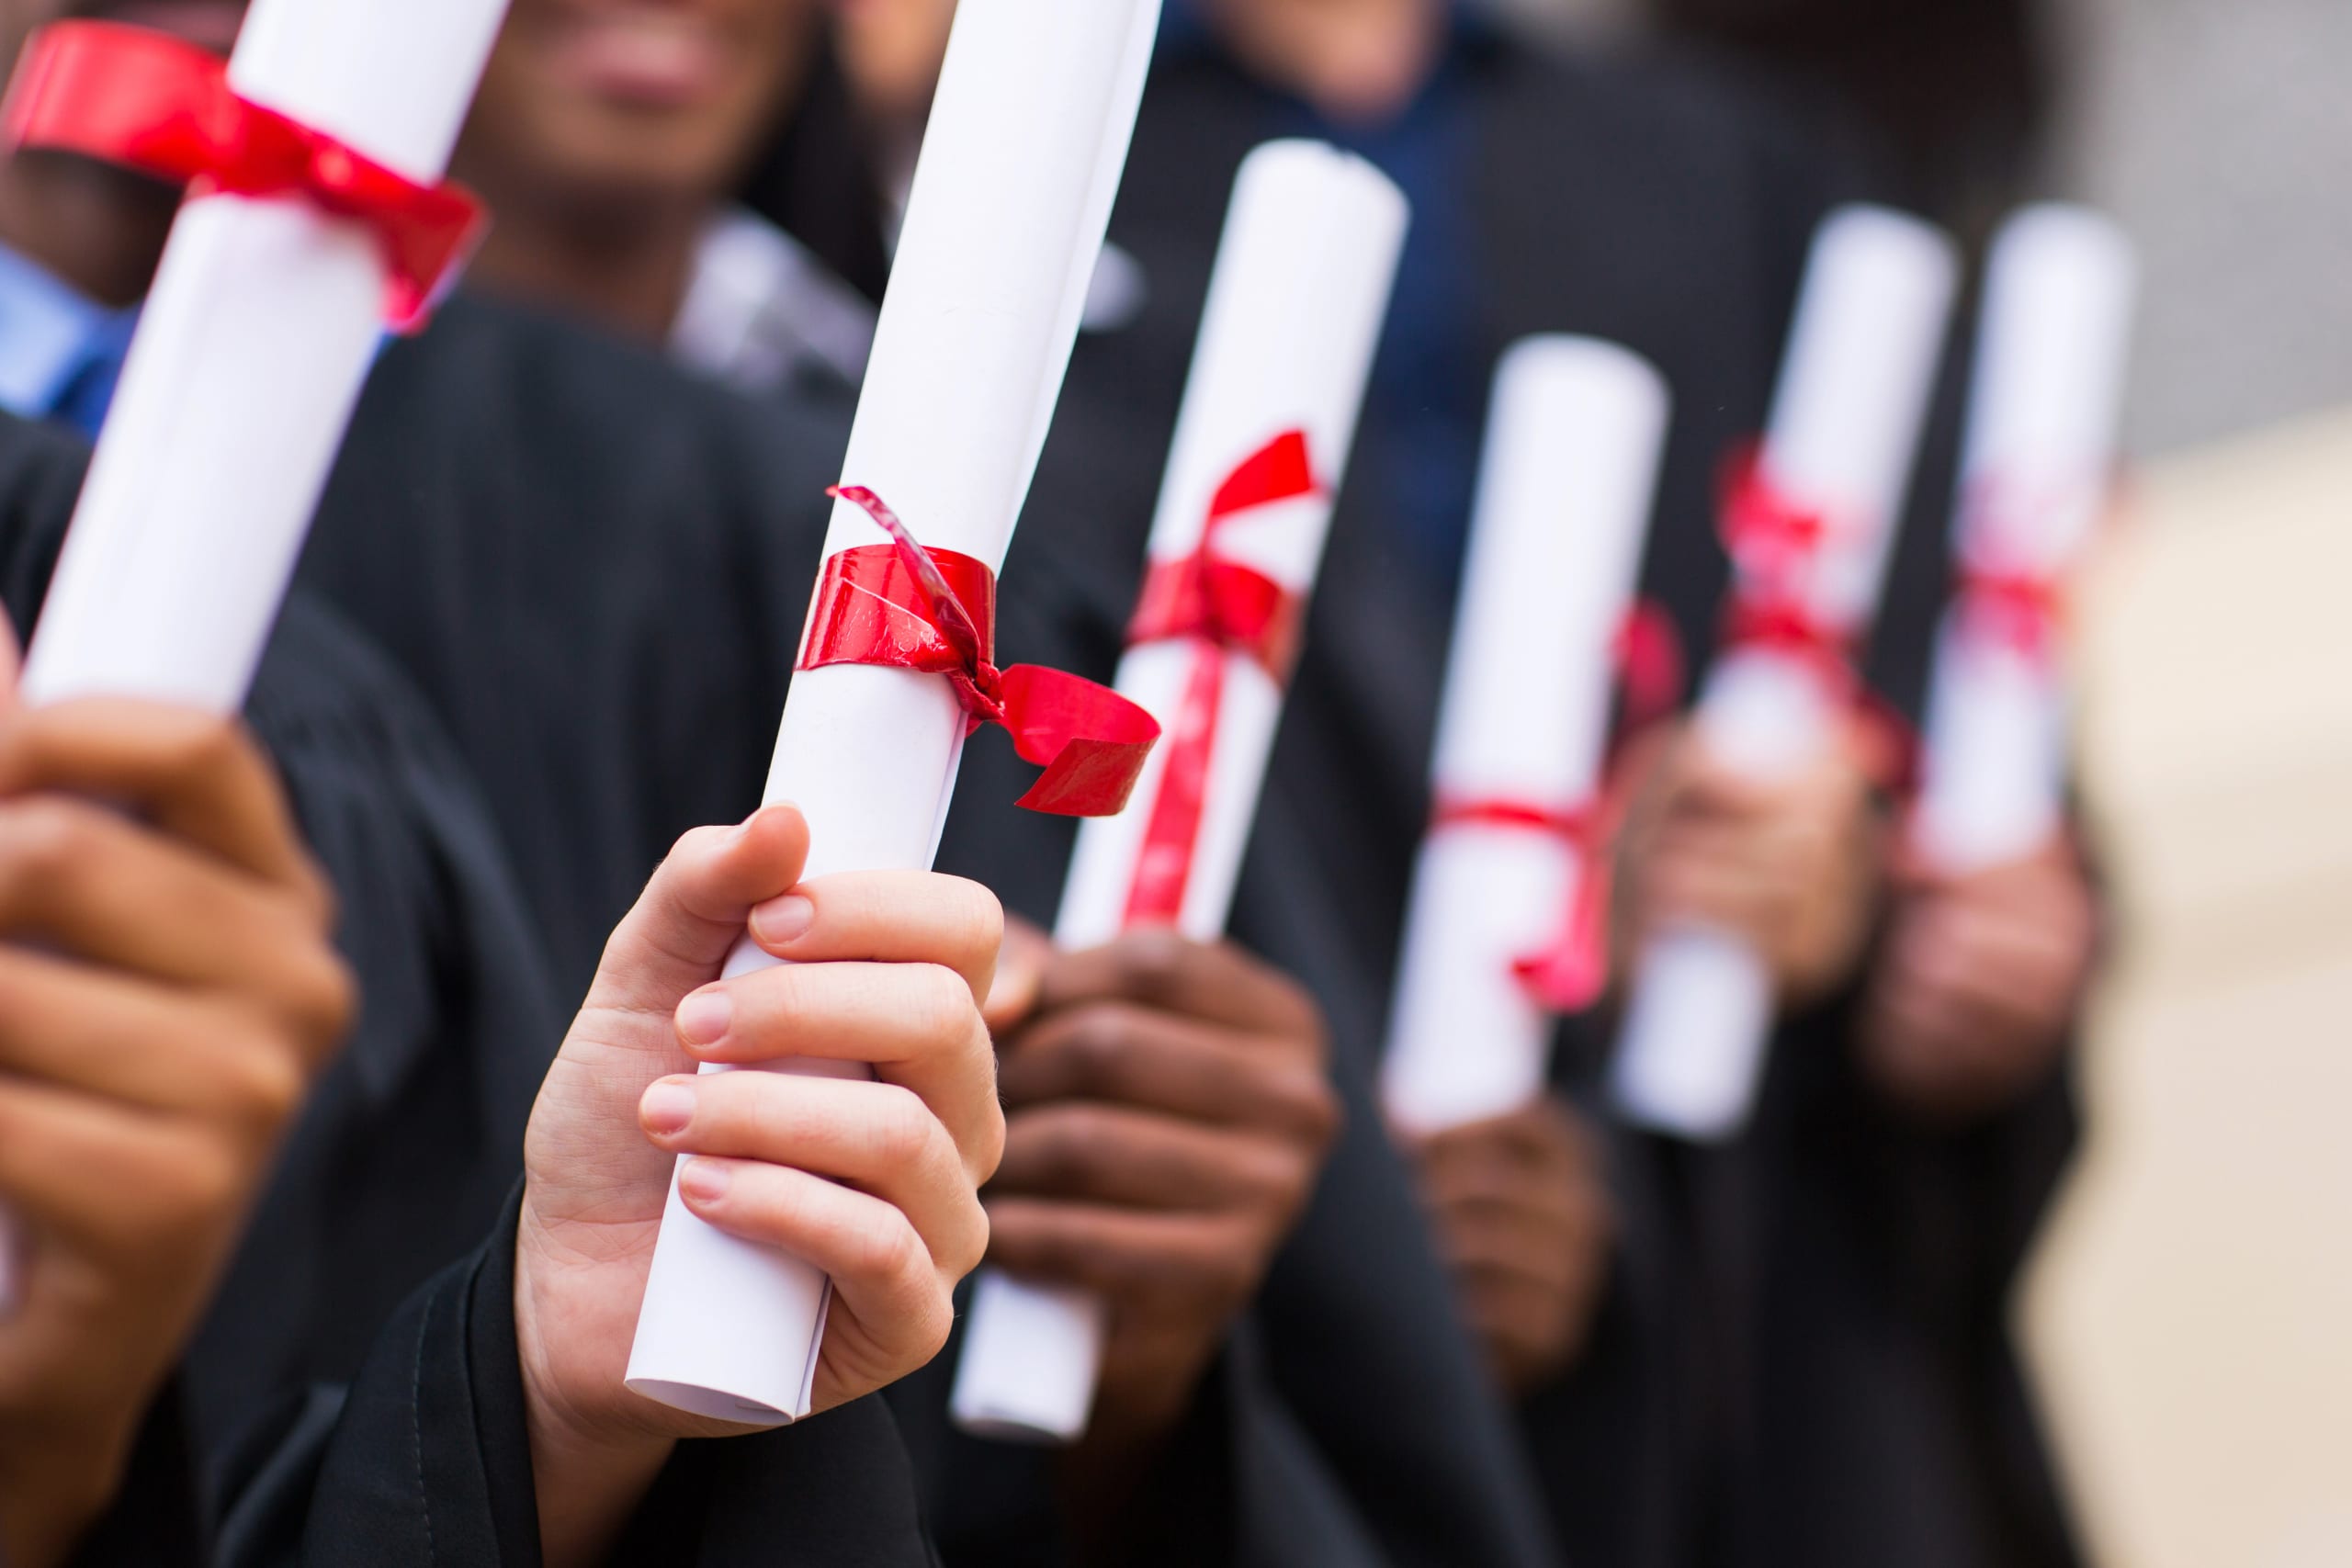 More people who are incarcerated to get free college as Pell Grant program expands